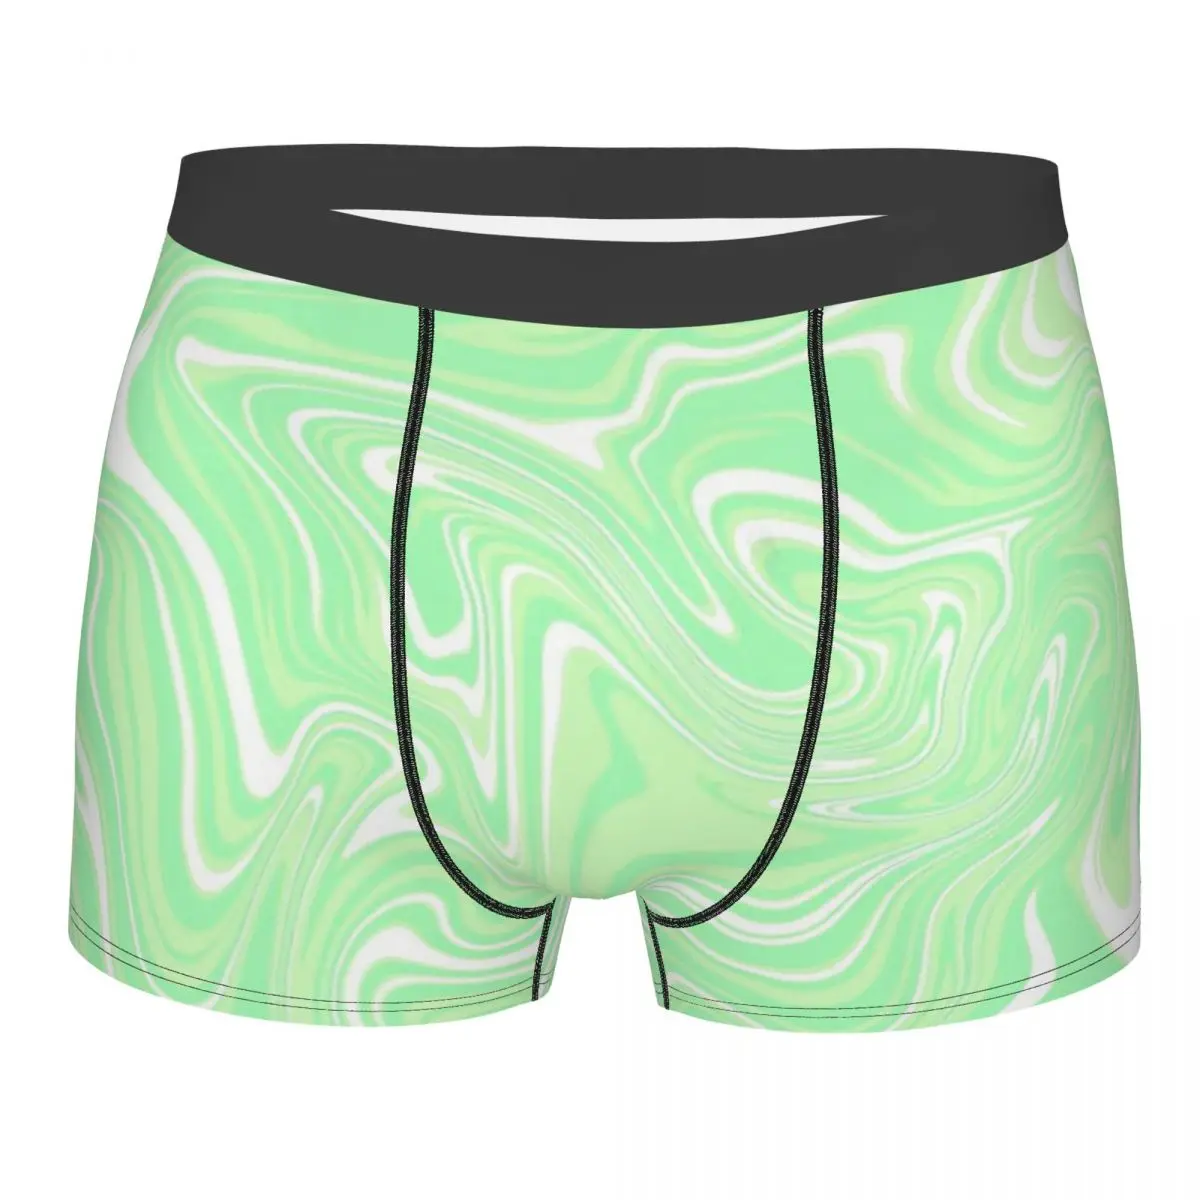 

Elegant Pale Green White Abstract Swirl Marbling Marbled Marble Pattern Underpants Panties Men's Underwear Shorts Boxer Briefs